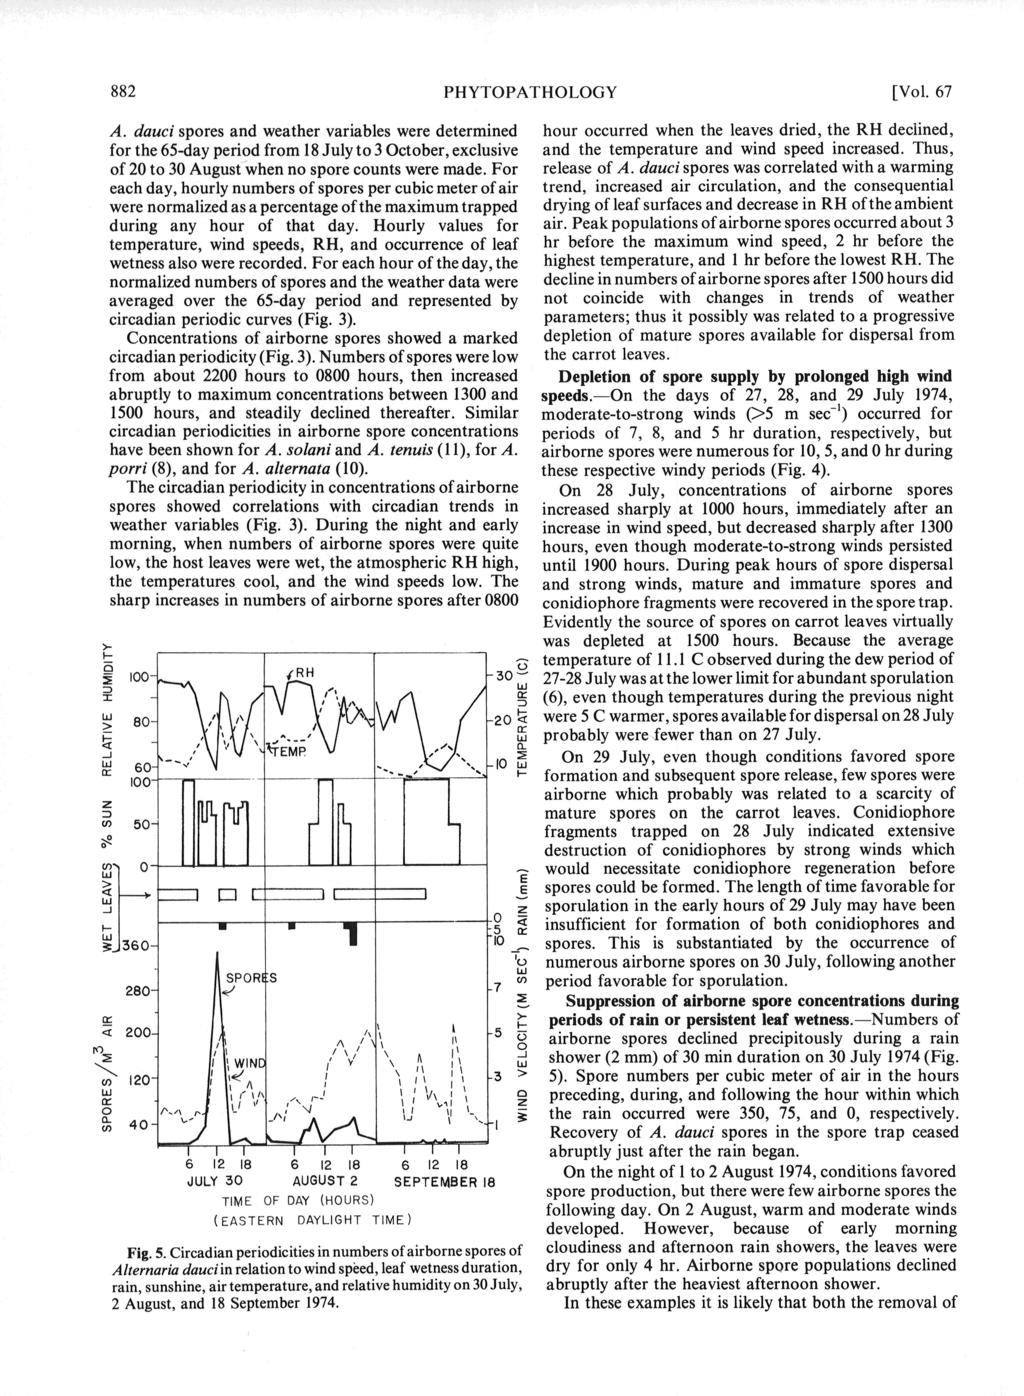 PHYTOPATHOLOGY 882 [Vol 7 hour occurred when leaves dried, RH declined, and temperature and wind speed increased Thus, release A dauci spores was correlated with a warming trend, increased air